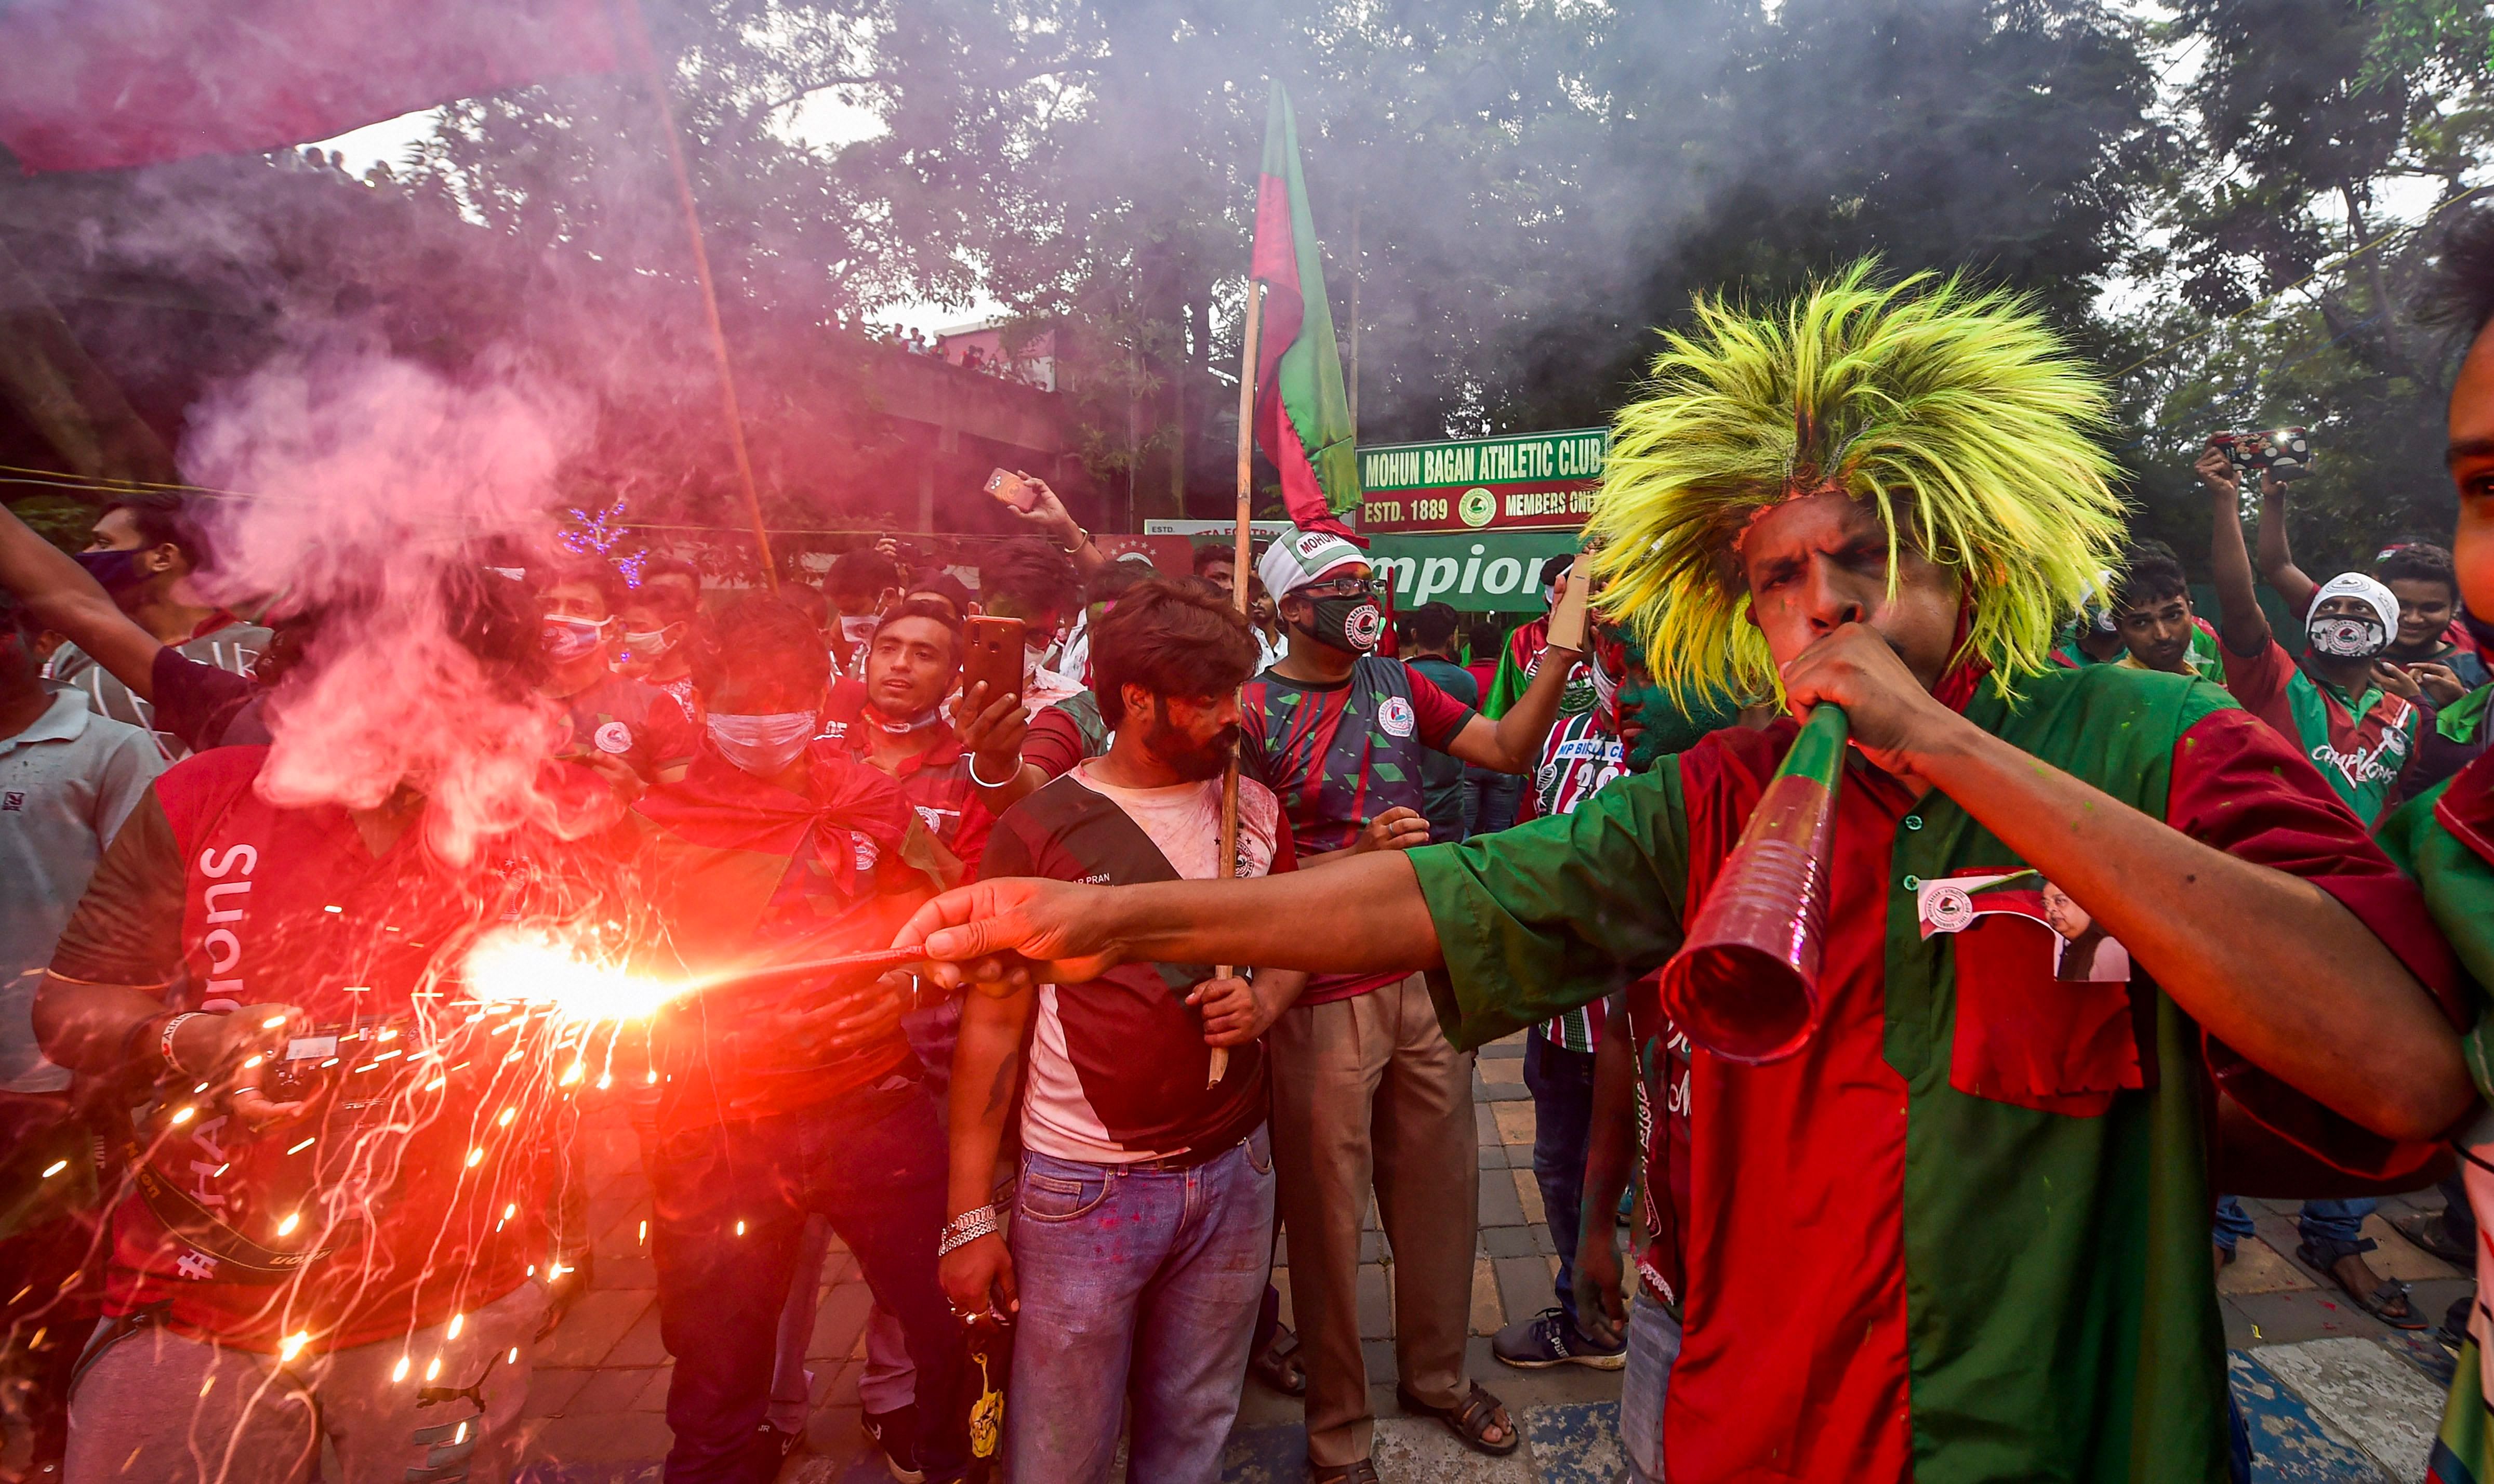 Supporters of Mohun Bagan A.C. celebrate during a victory parade after the club won I-League championship, in Kolkata, Sunday, Oct. 18, 2020. Credit: PTI Photo